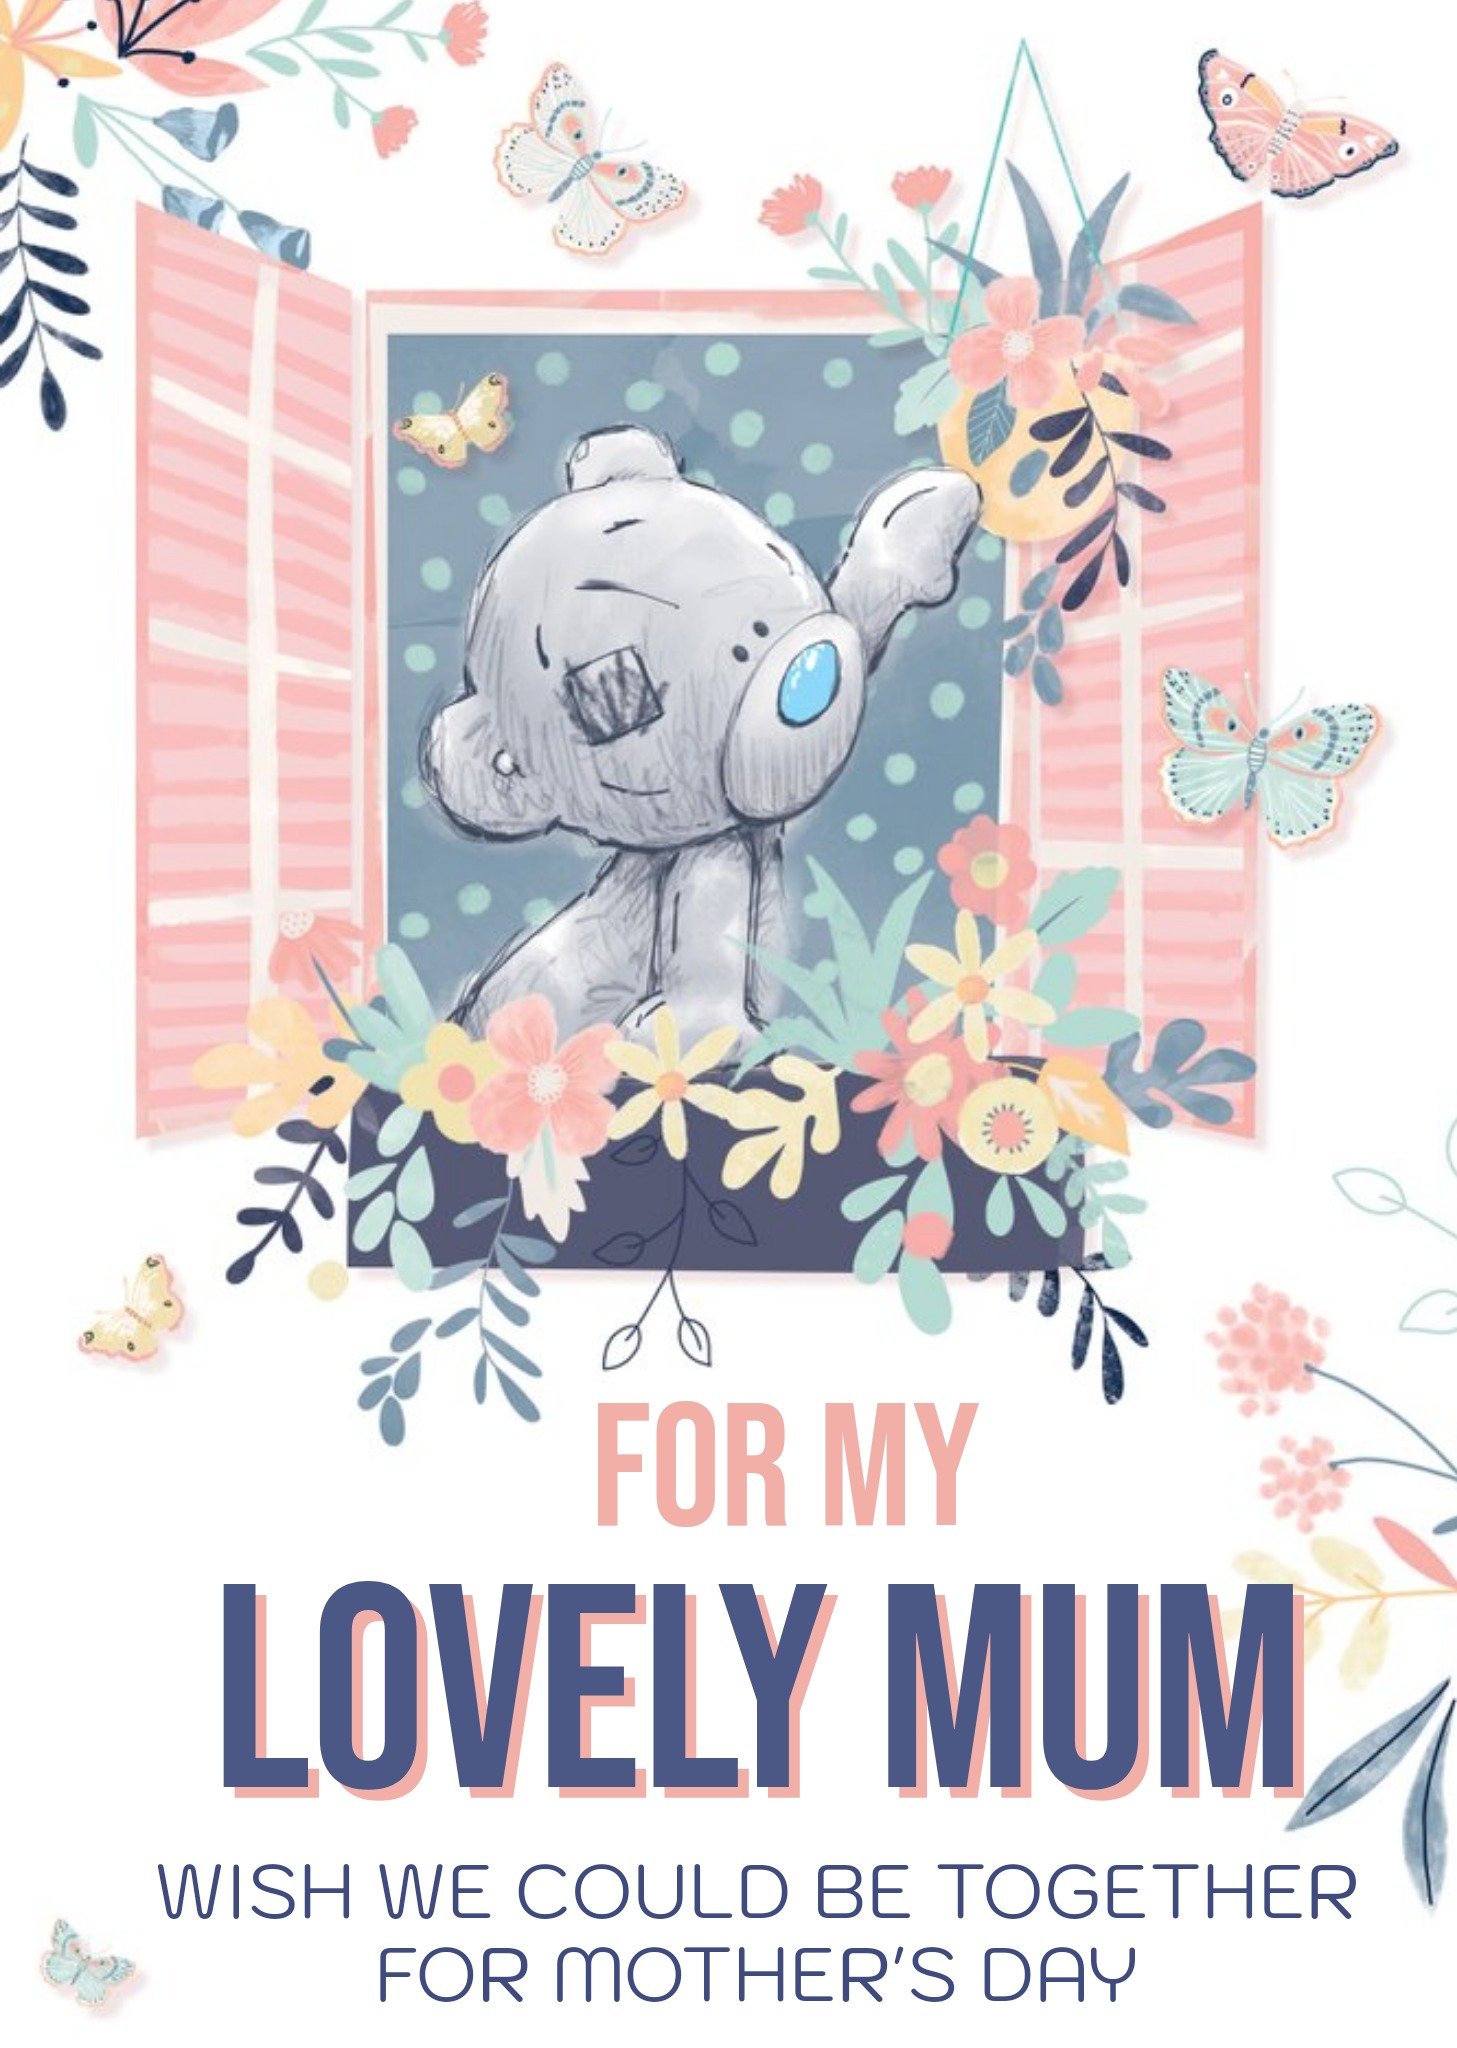 Me To You For My Lovely Mum Wish We Could Be Together Across The Miles Isolation Mother's Day Card E